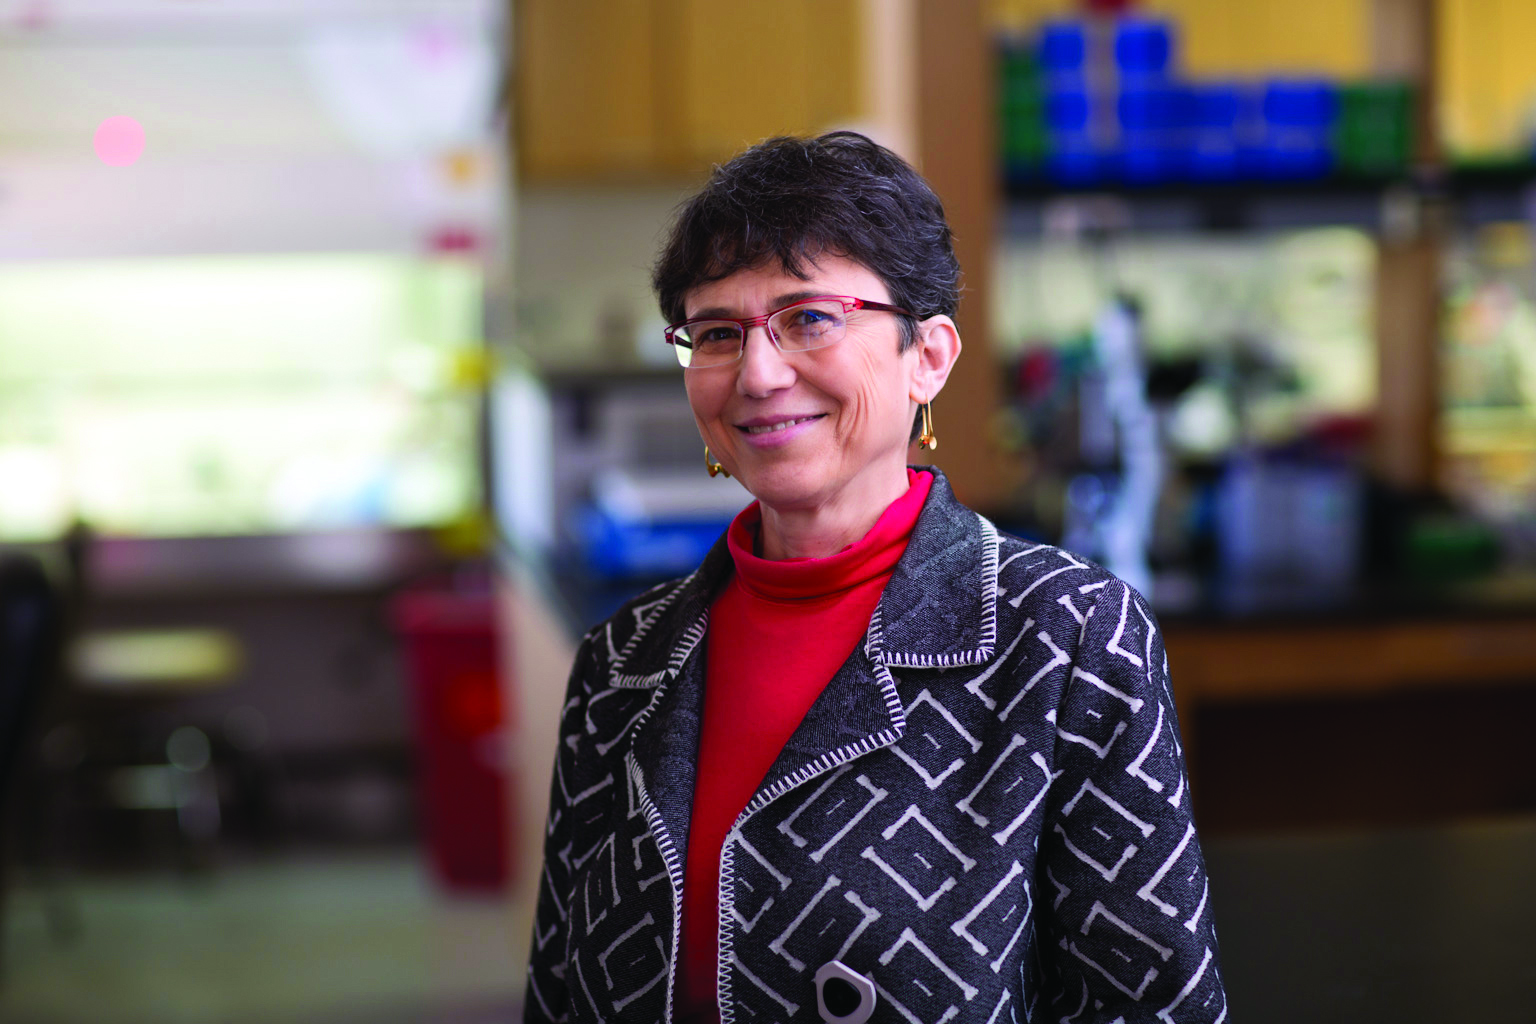 Grace Aldrovandi, MD, professor of pediatrics, pathology and molecular microbiology and immunology at the Keck School of Medicine of USC, has been awarded $17 million by the National Institute of Allergy and Infectious Diseases, part of the National Institutes of Health.